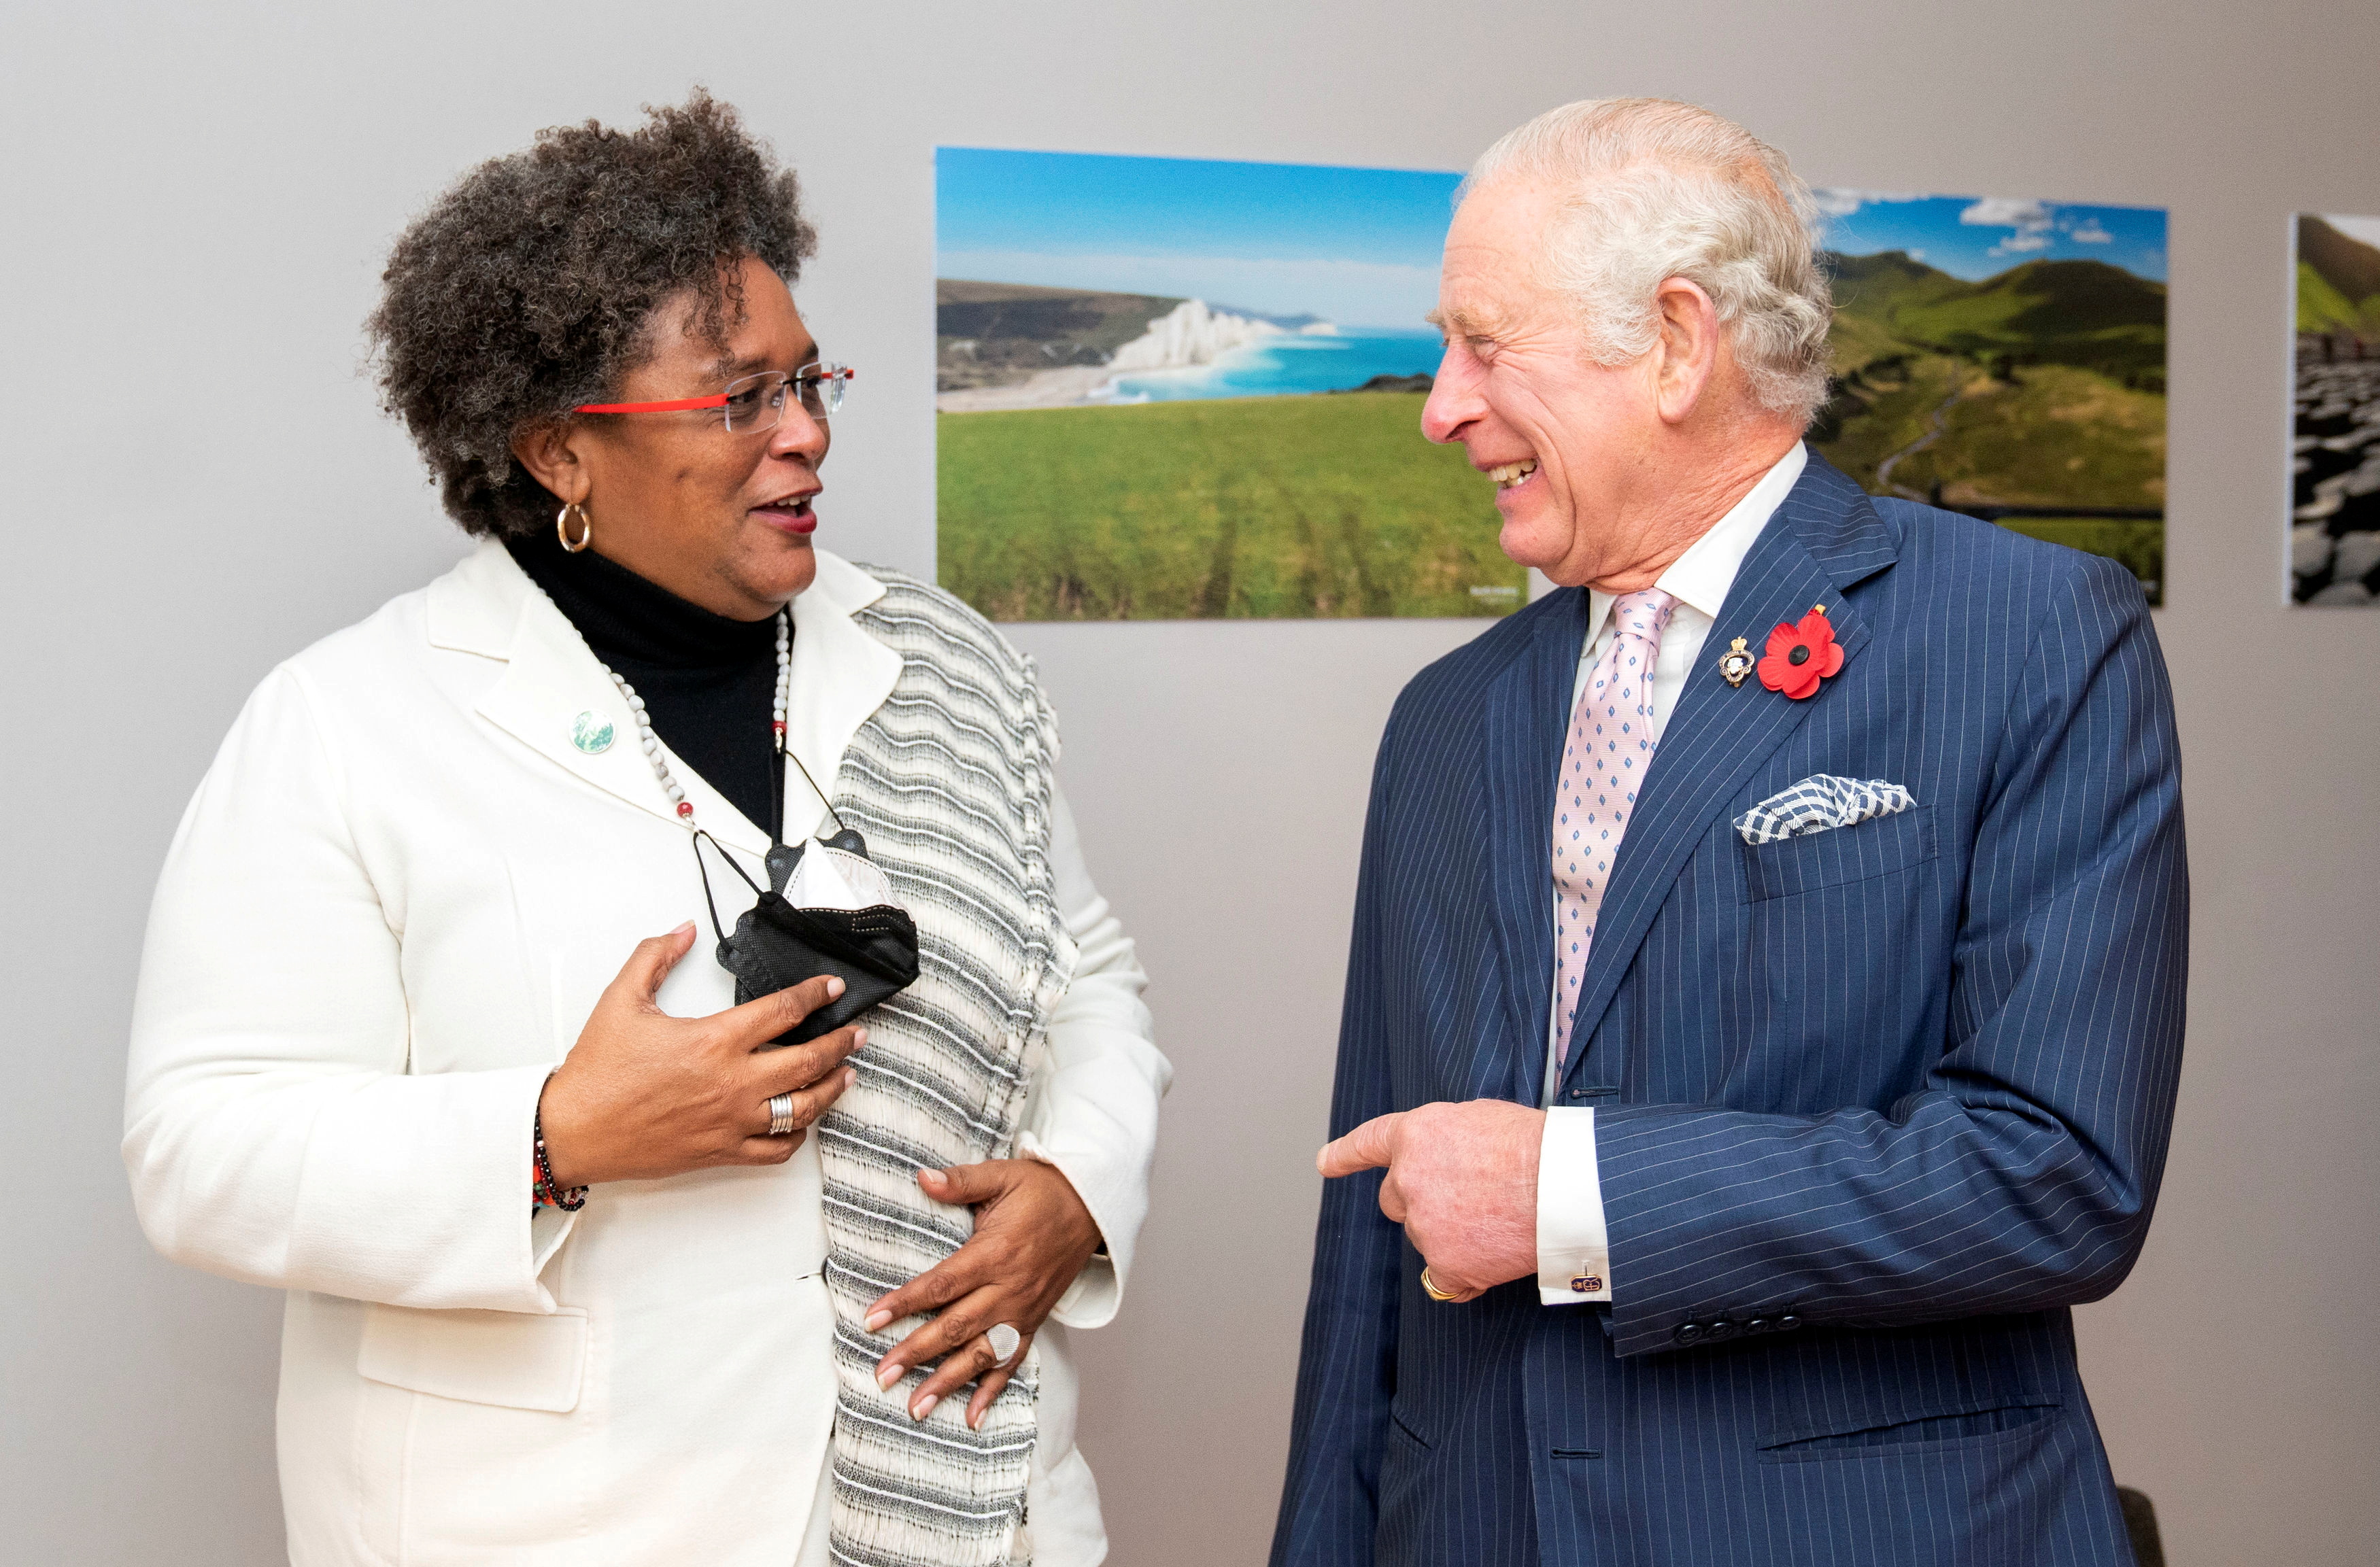 Britain's Charles, Prince of Wales, greets Barbados' Prime Minister Mia Amor Mottley ahead of their bilateral meeting on the sidelines of the UN Climate Change Conference (COP26) in Glasgow, Scotland, Britain November 1, 2021. Jane Barlow/Pool via REUTERS